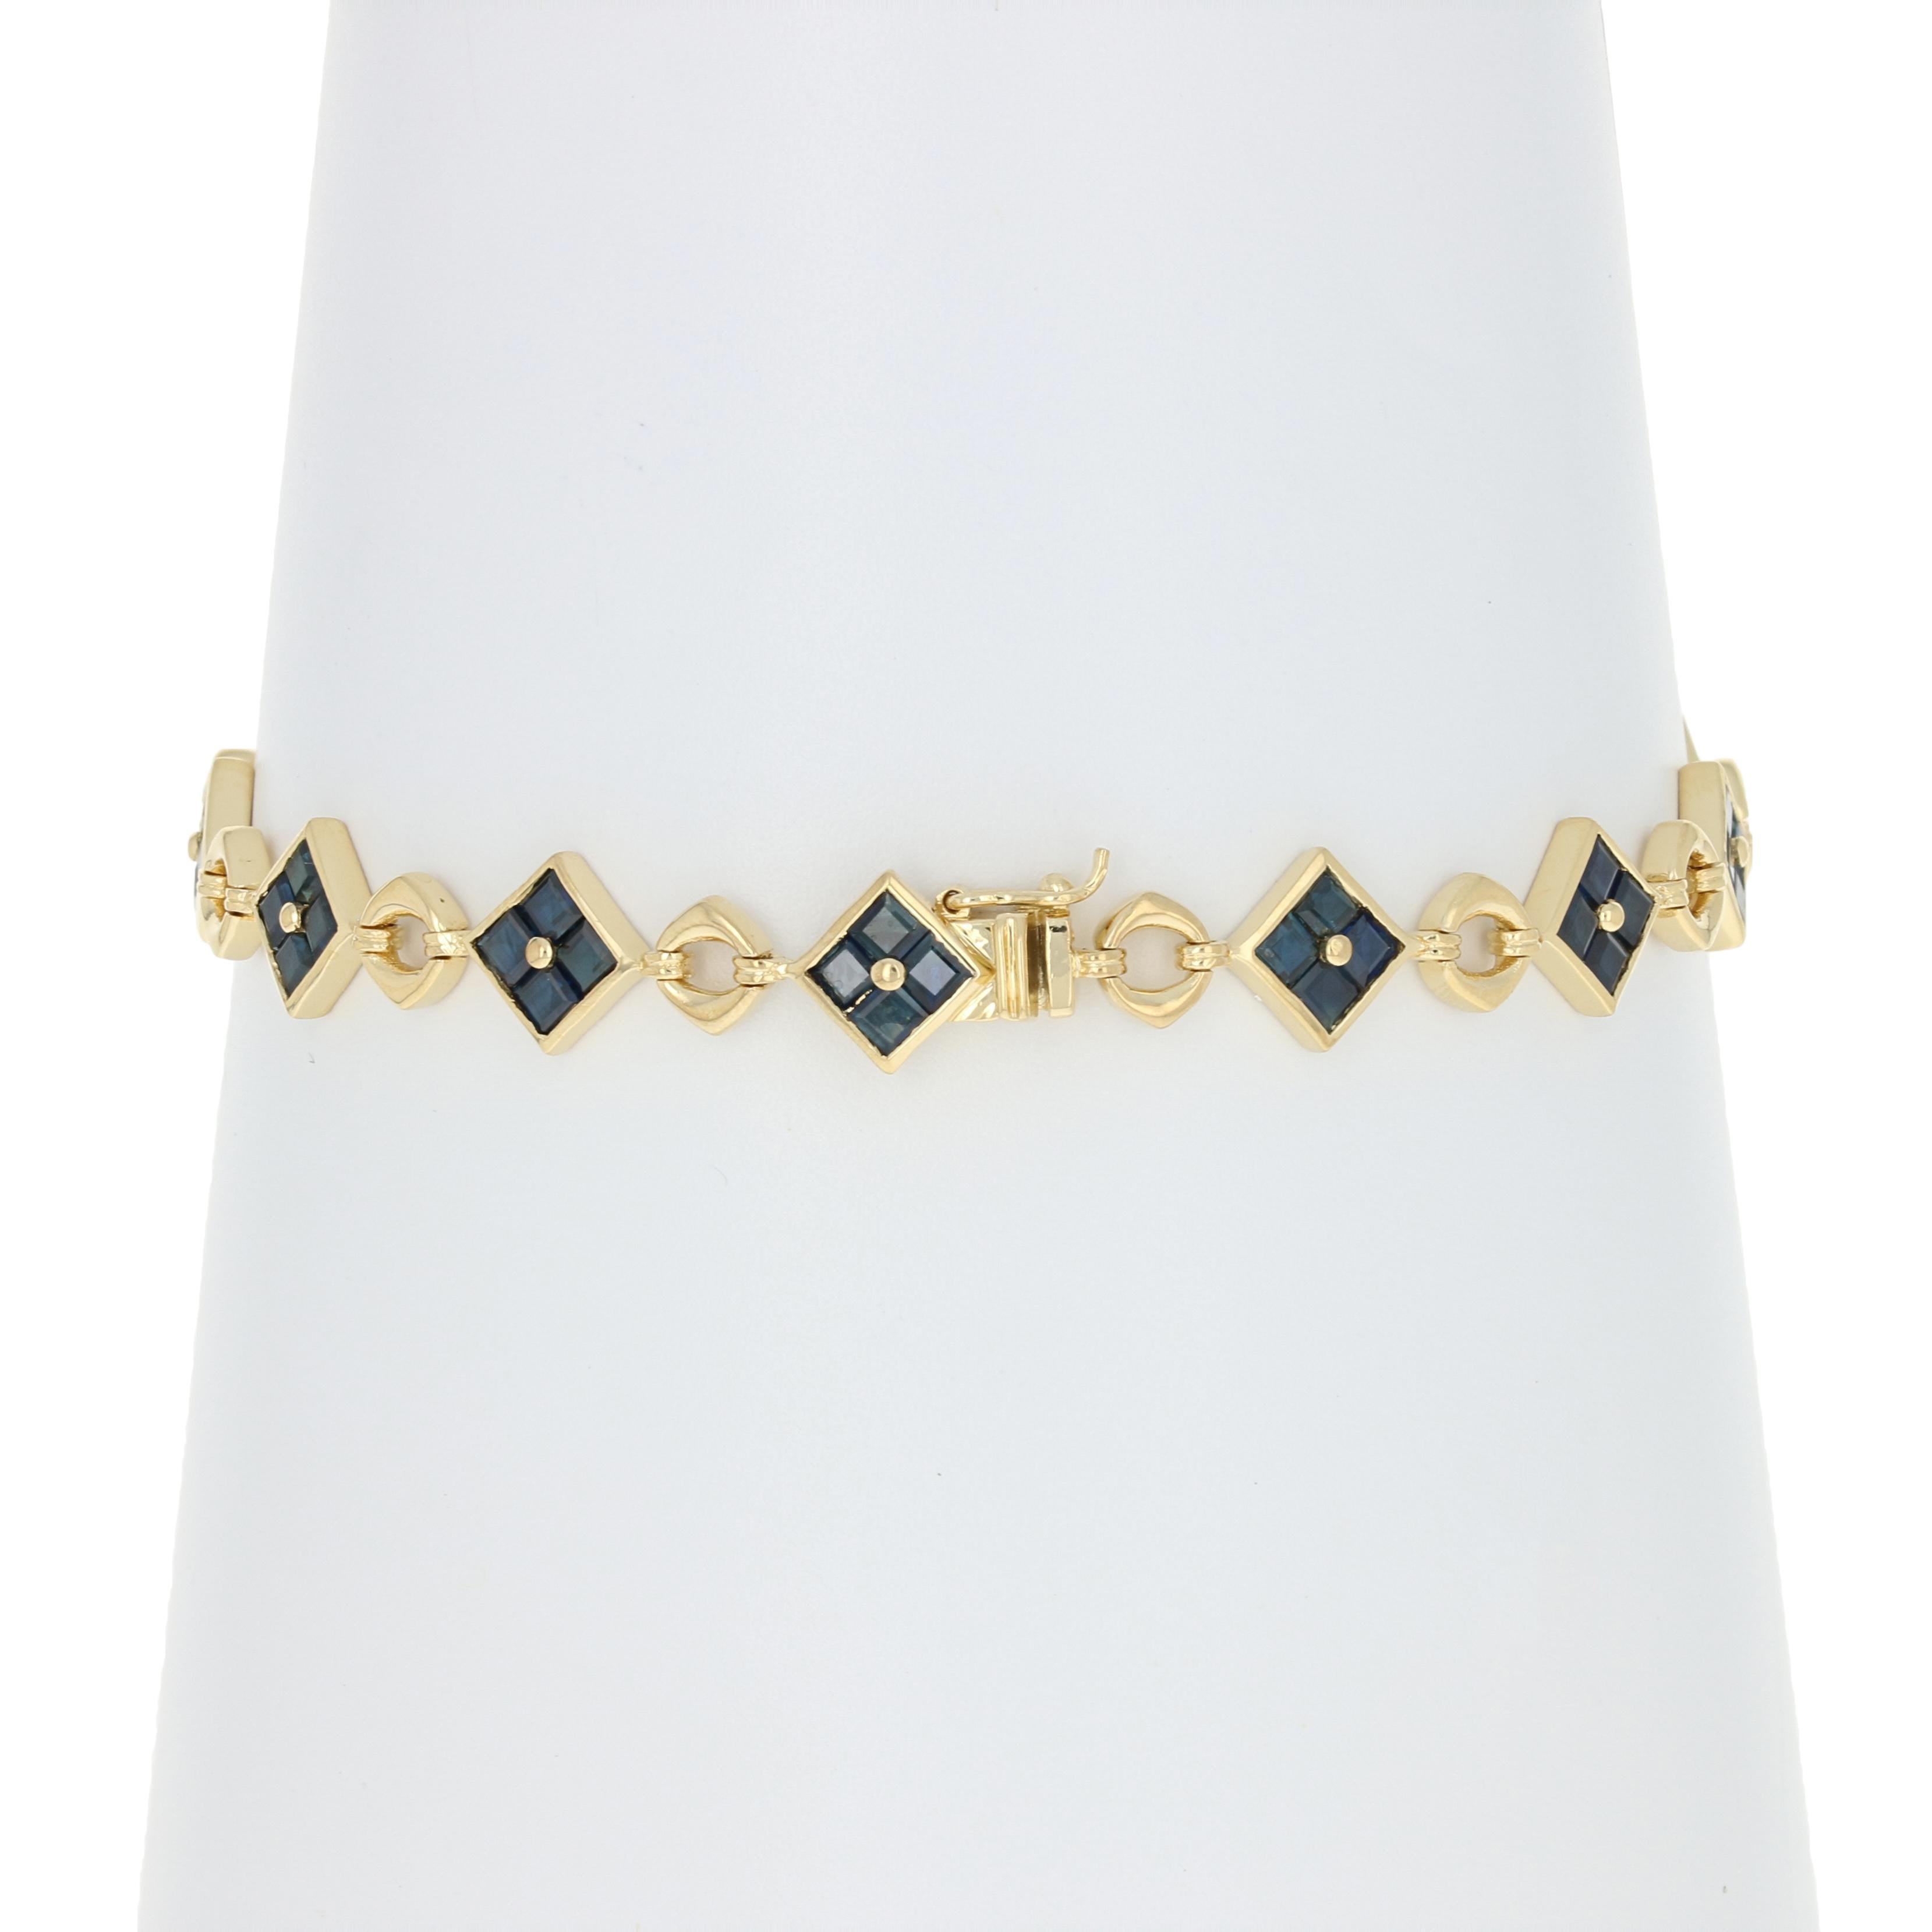 Add an elegant splash of color to your day or evening ensembles with this gorgeous piece! Crafted in luxurious 18k yellow gold, this contemporary link bracelet showcases rich blue sapphires arranged into square-shaped formations.   

Metal Content: